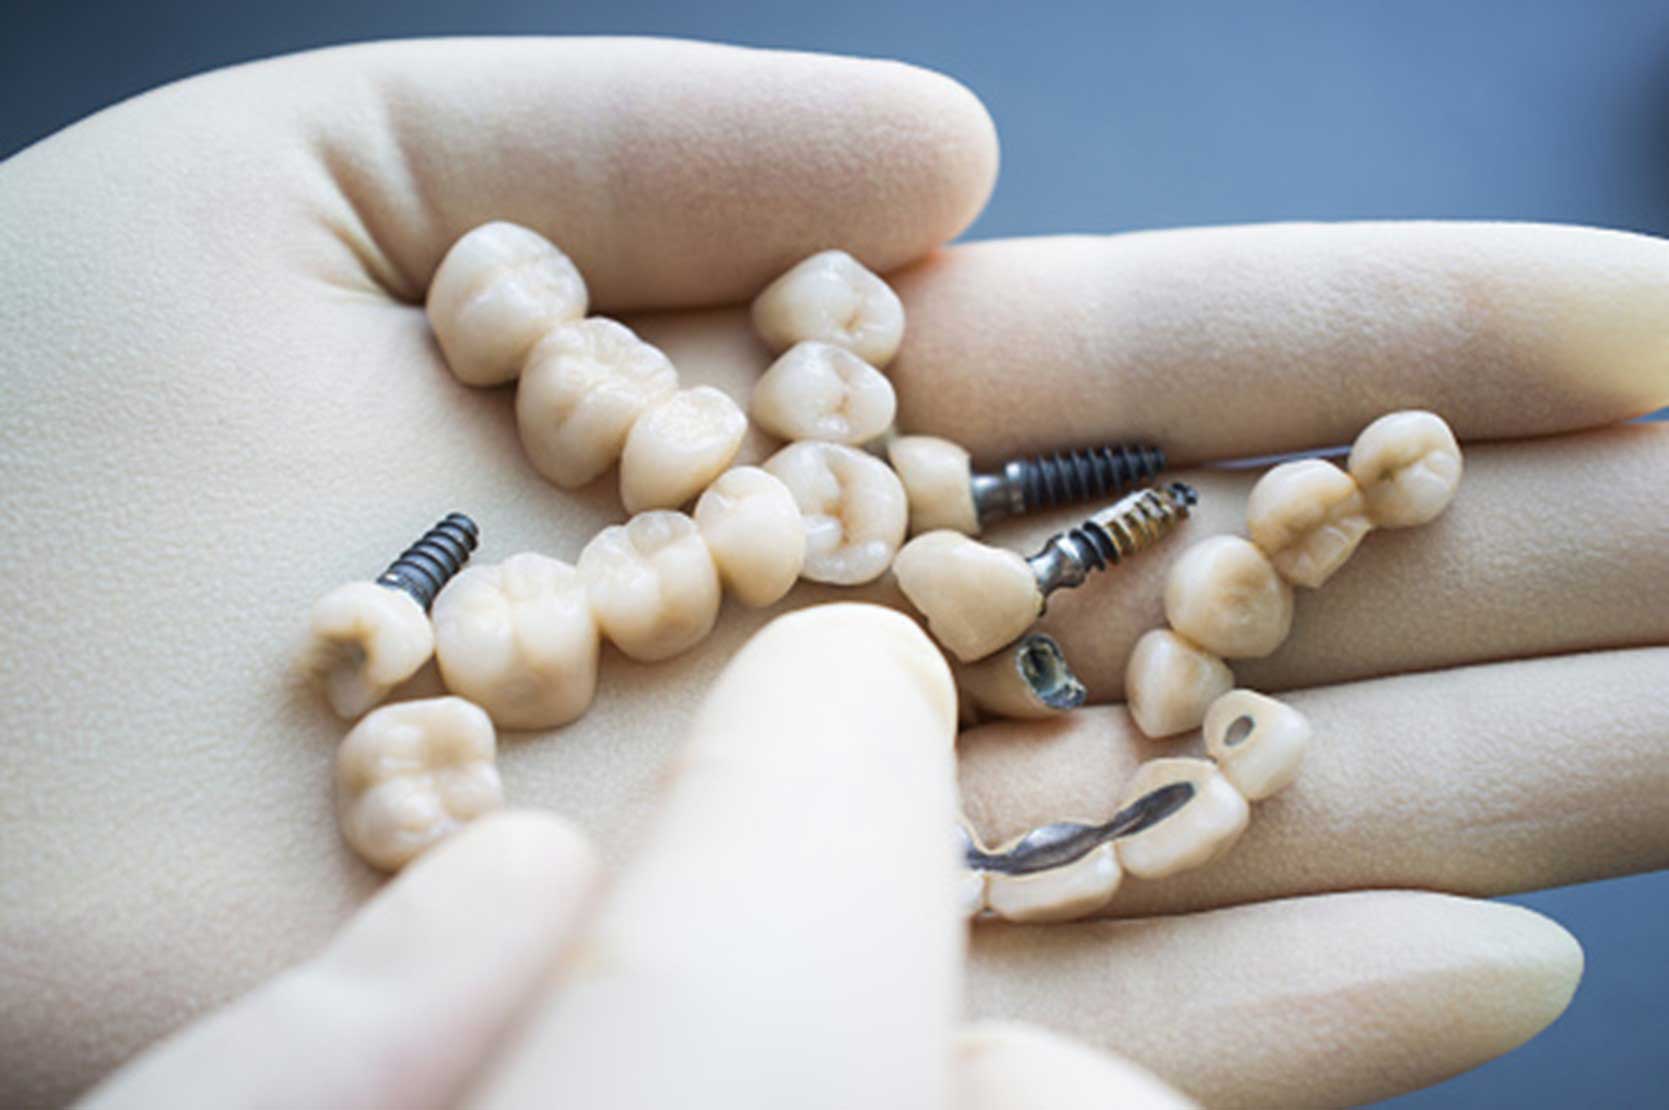 artificial teeth held in the hand of a doctor, mechanical teeth with screws